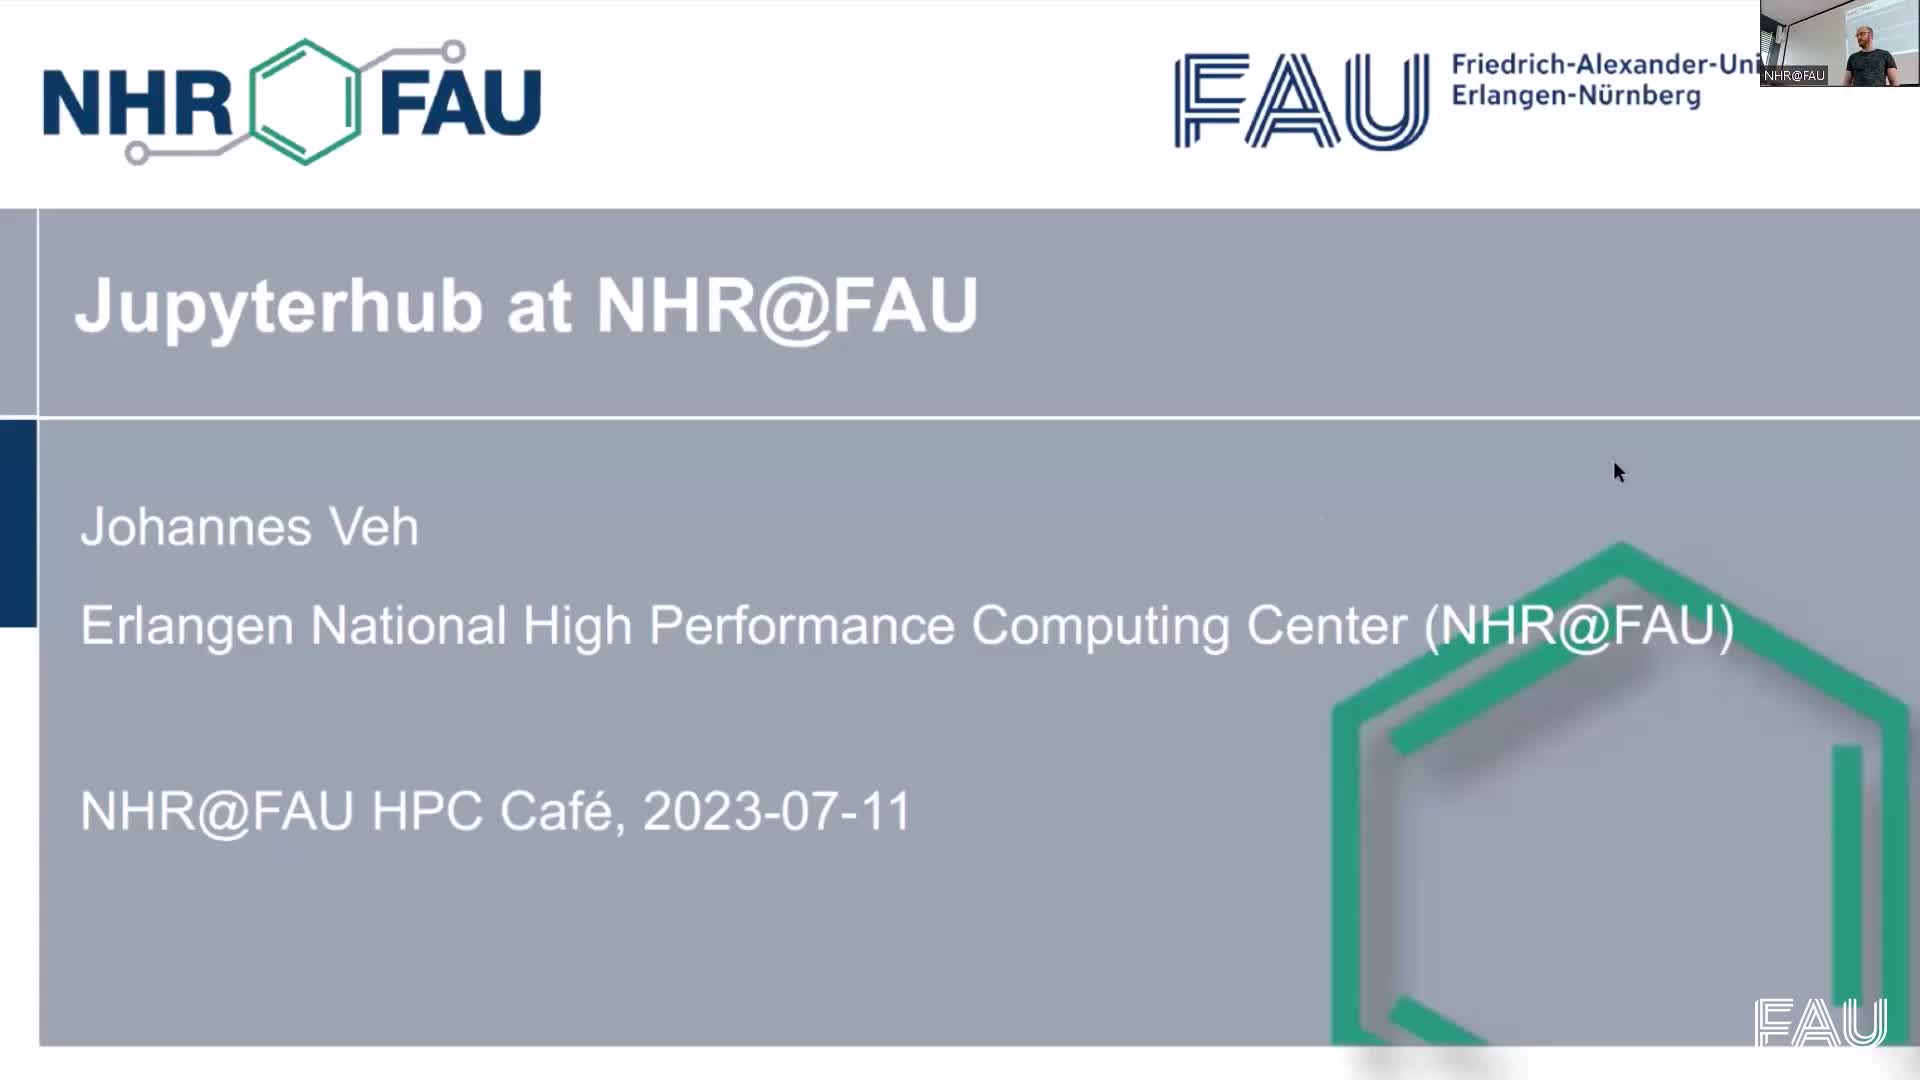 HPC Cafe on July 11, 2023: Using the Jupyterhub Service at NHR@FAU preview image